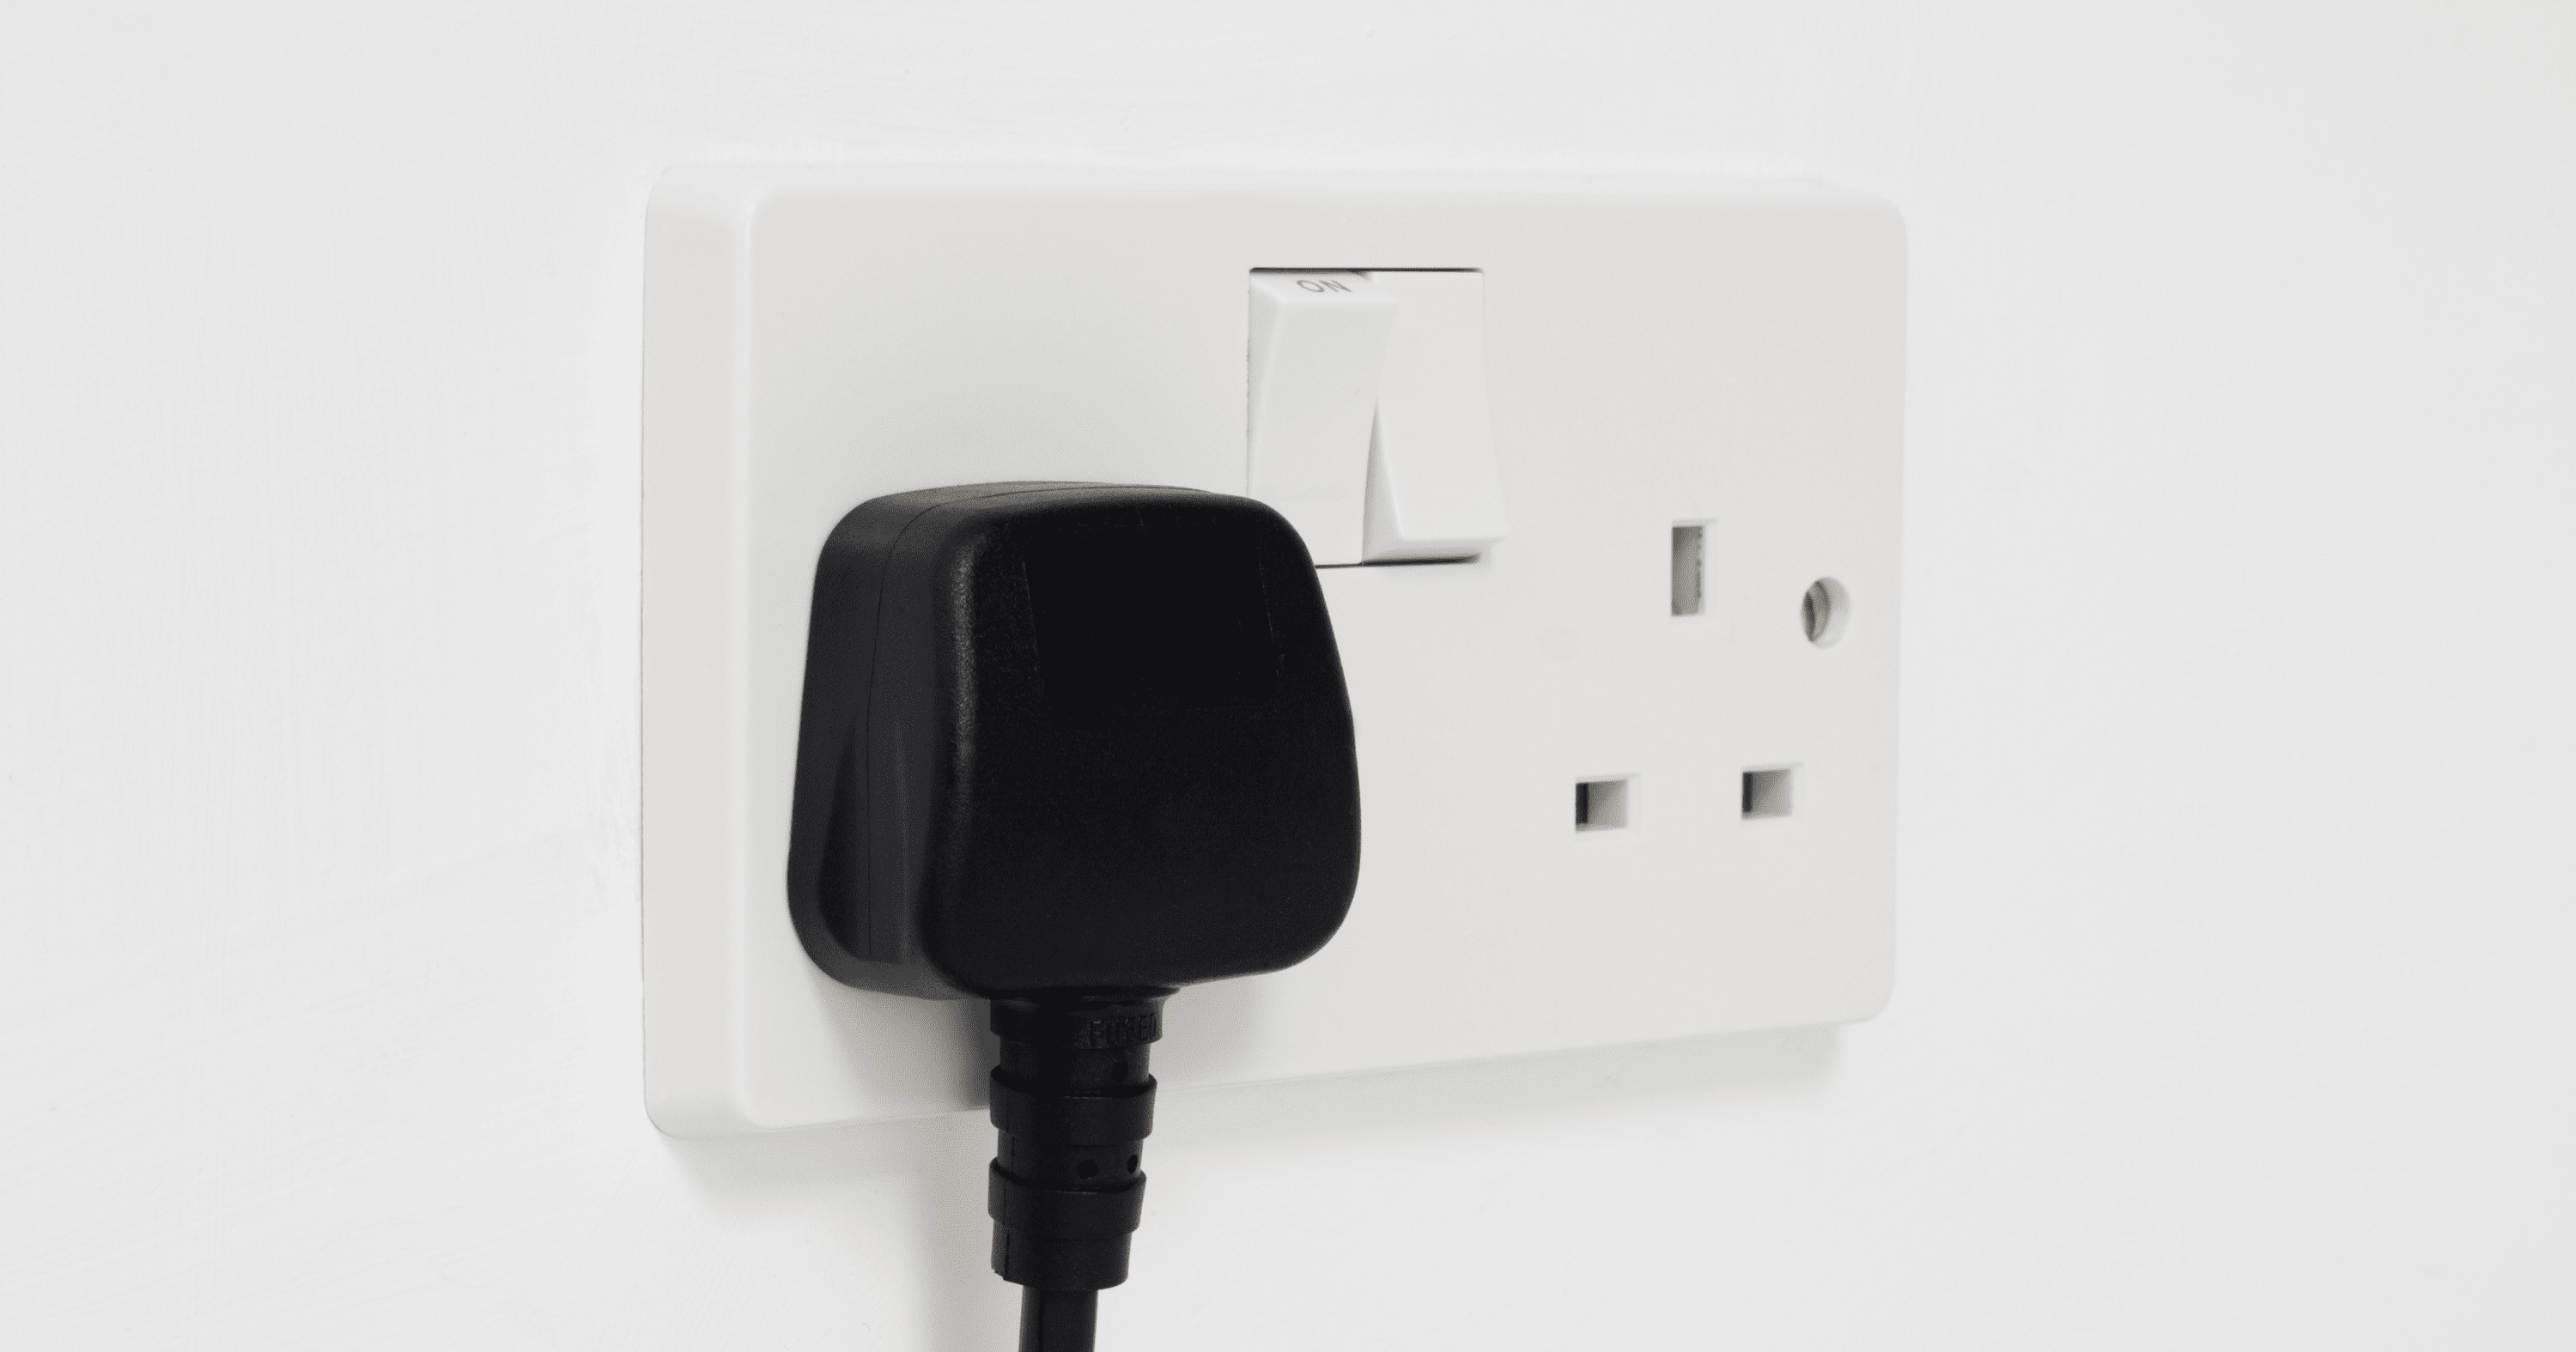 A stock image of a plug - start your property search on Share to Buy!